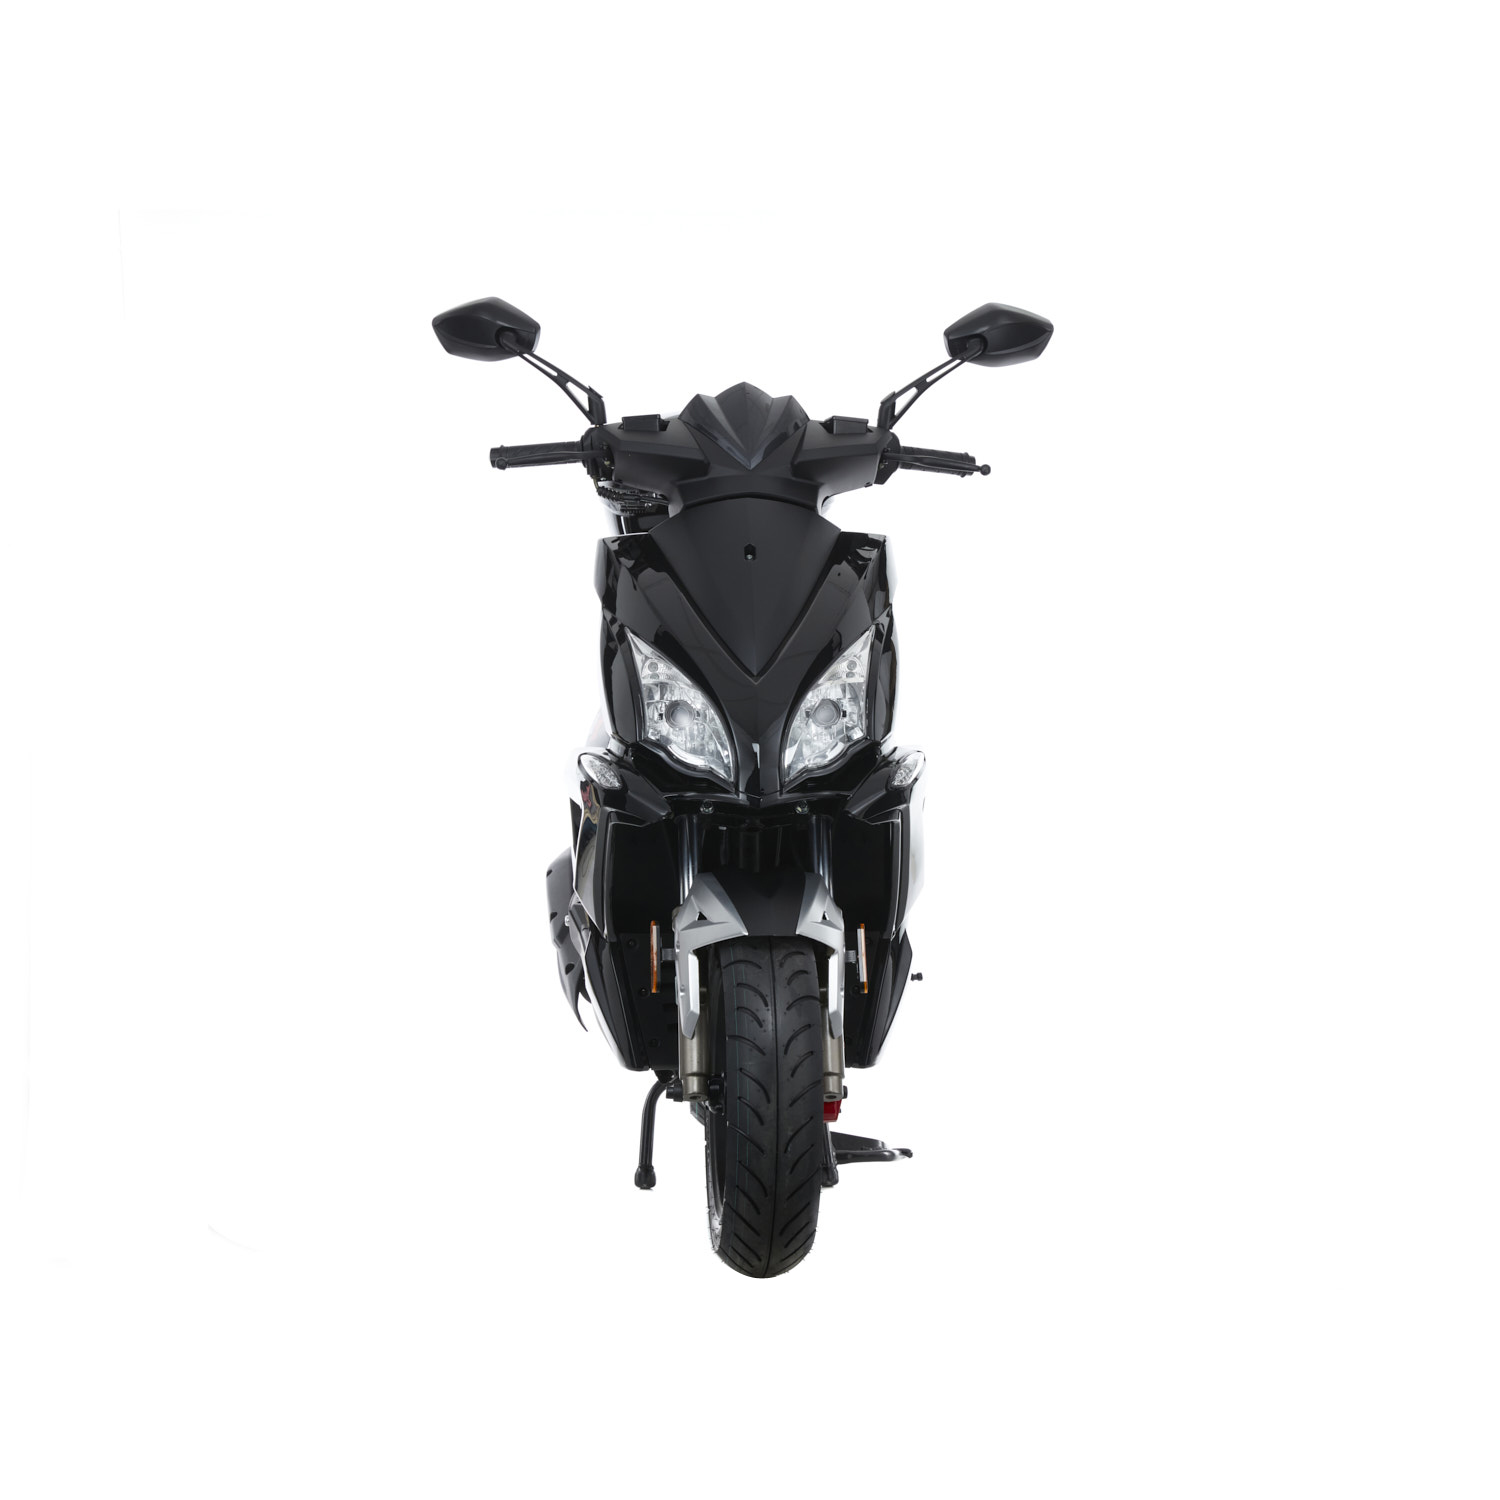 50cc motorcycle insurance